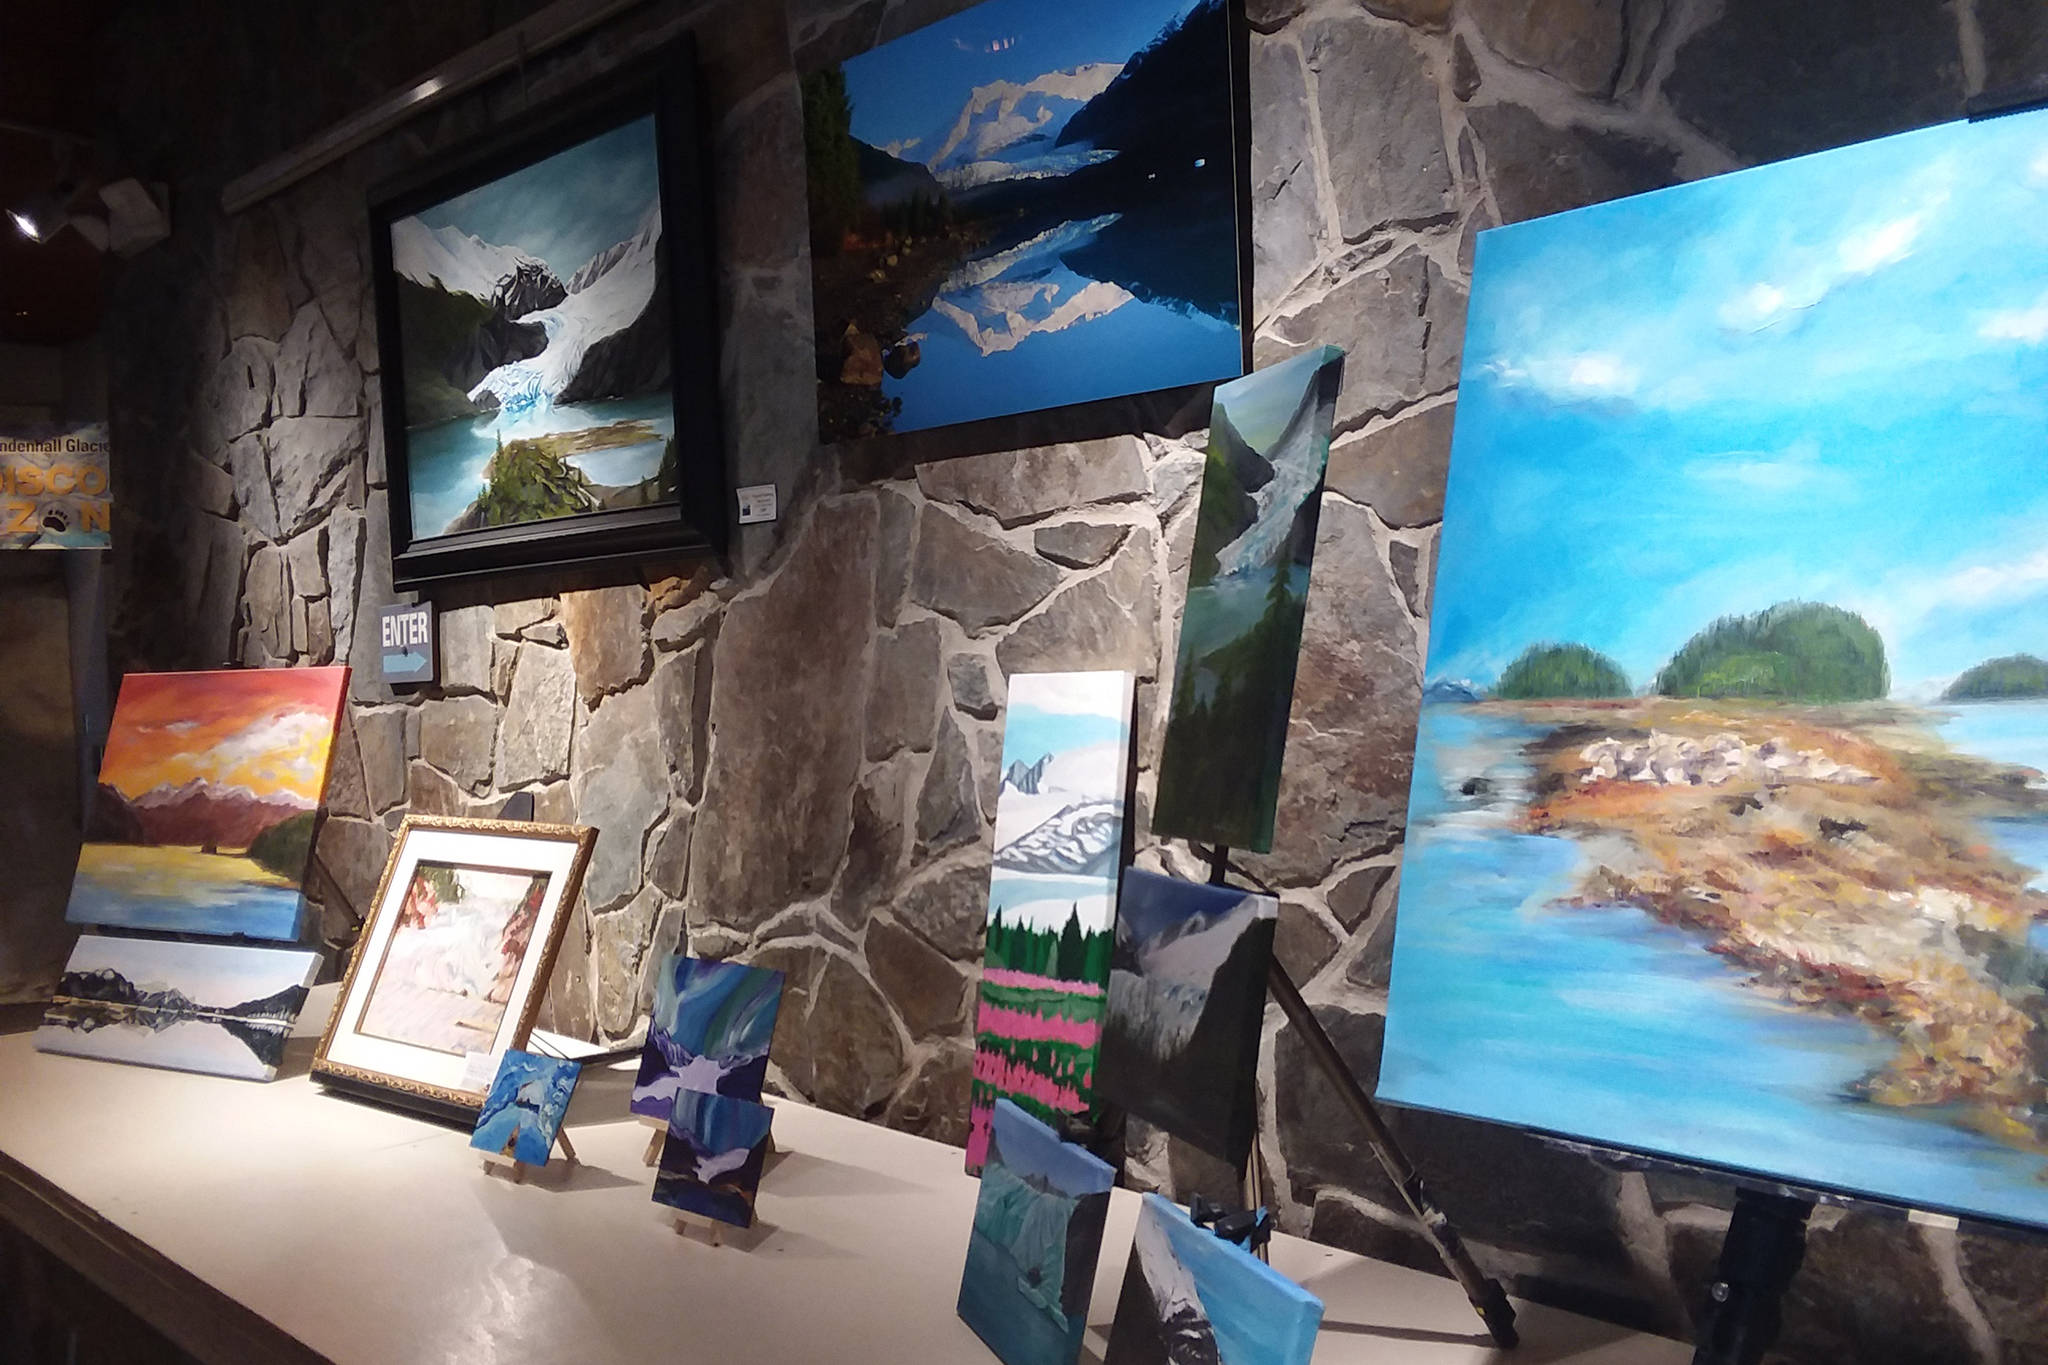 The Mendenhall Valley Glacier Visitor Center is the site of month-long art shows presented by Discovery Southeast. (Courtesy Photo | For Discovery Southeast)